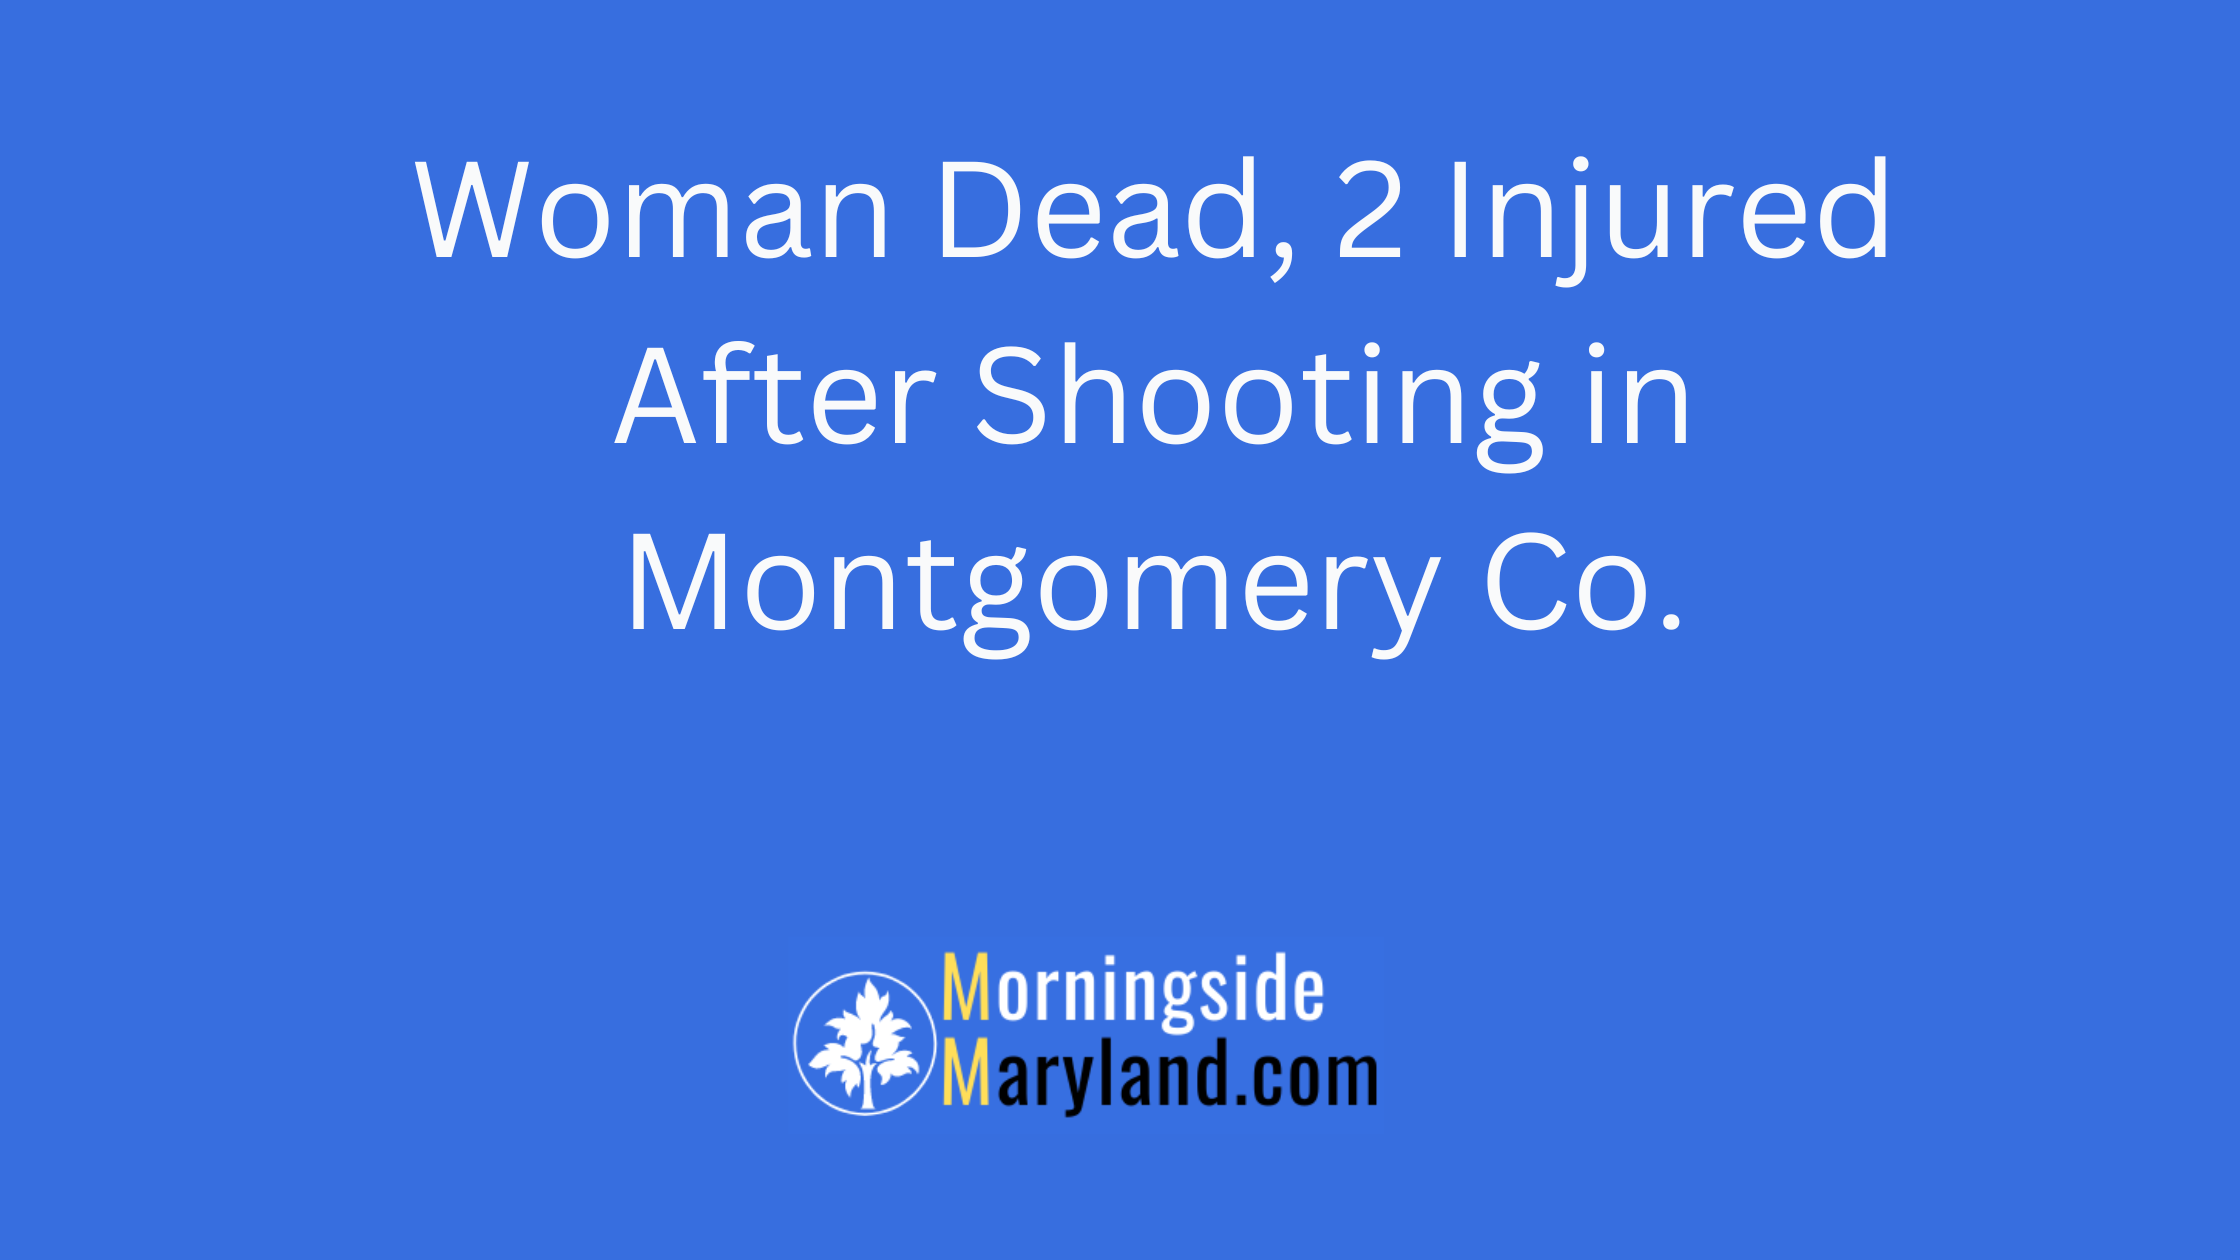 Woman Dead, 2 Injured After Shooting in Montgomery Co.